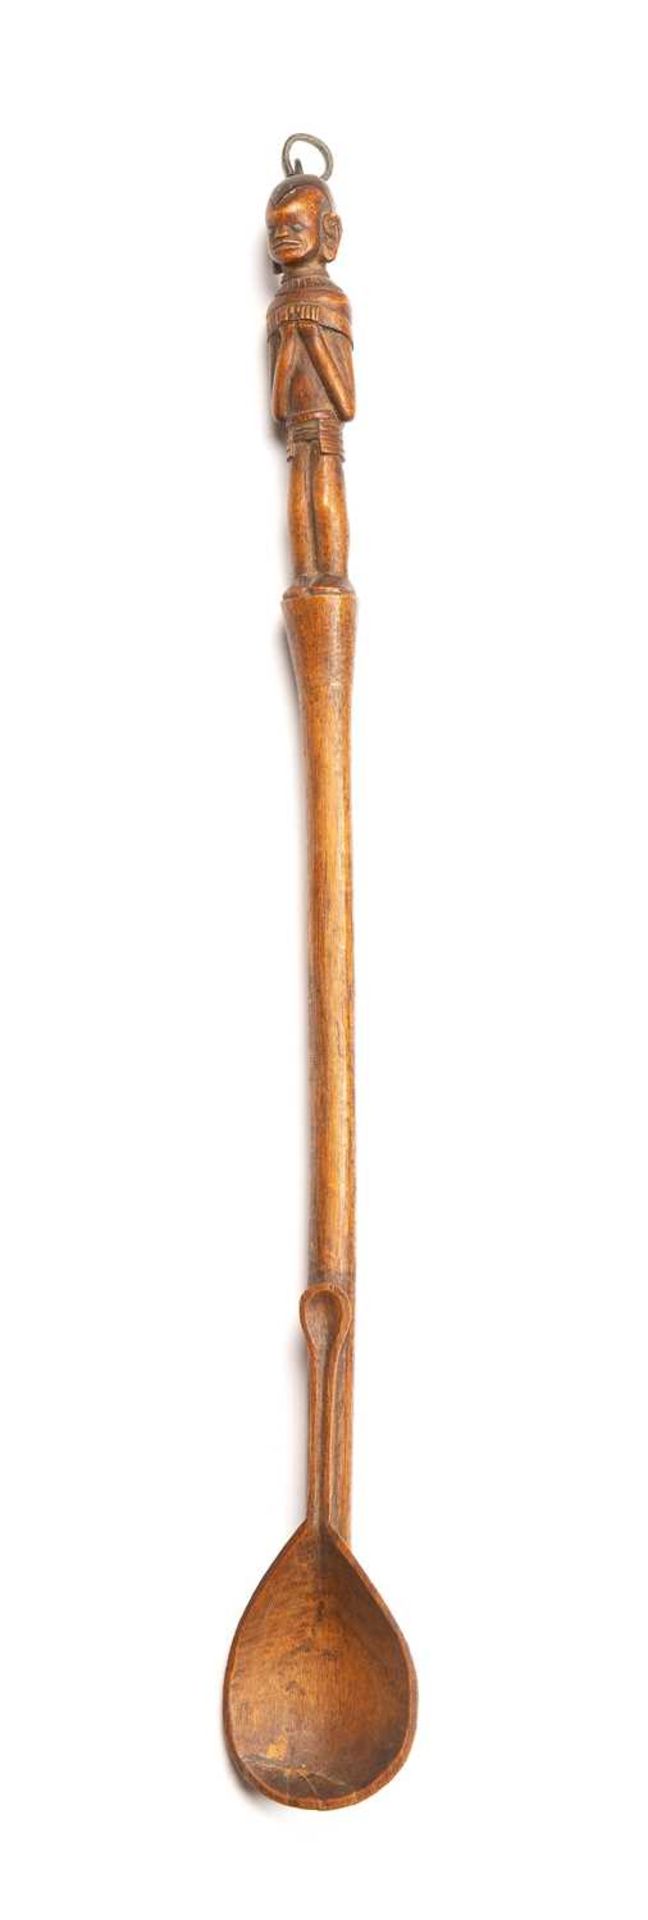 A Kamba Kenya carved wooden spoon with a female figure inlaid with metal eyes. 47cm in length.